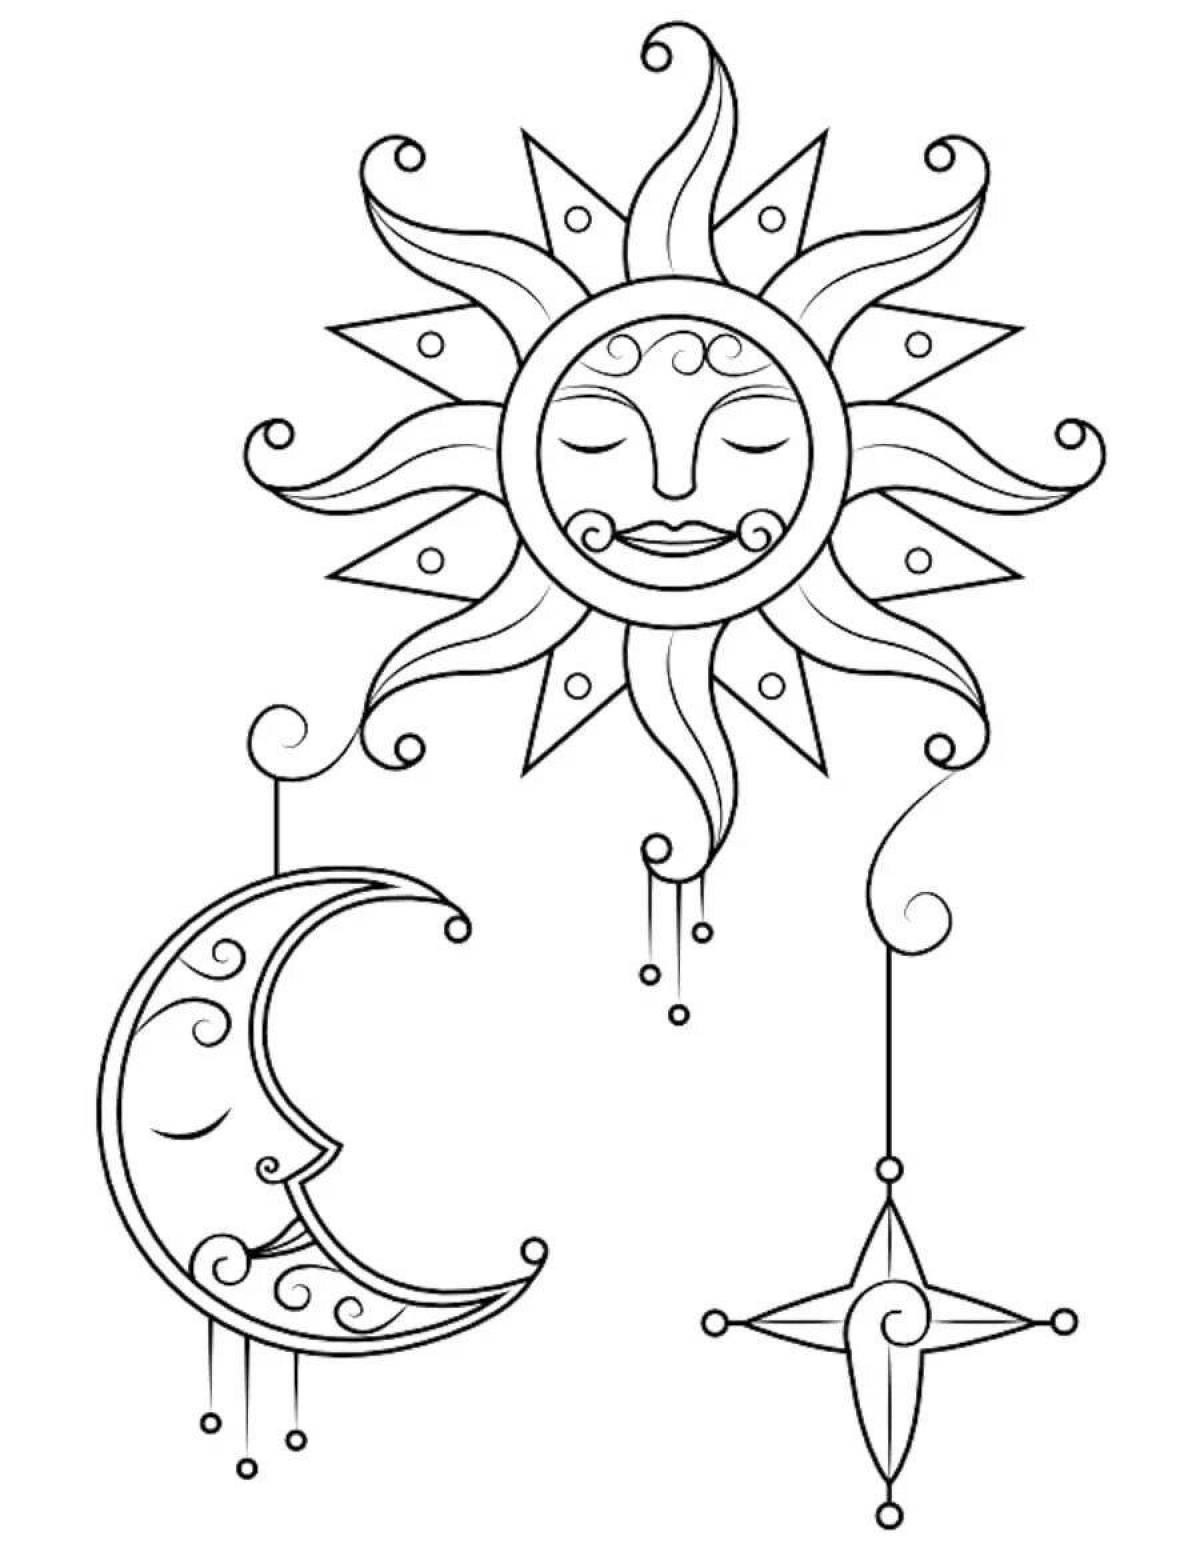 Moon and sun for kids #5